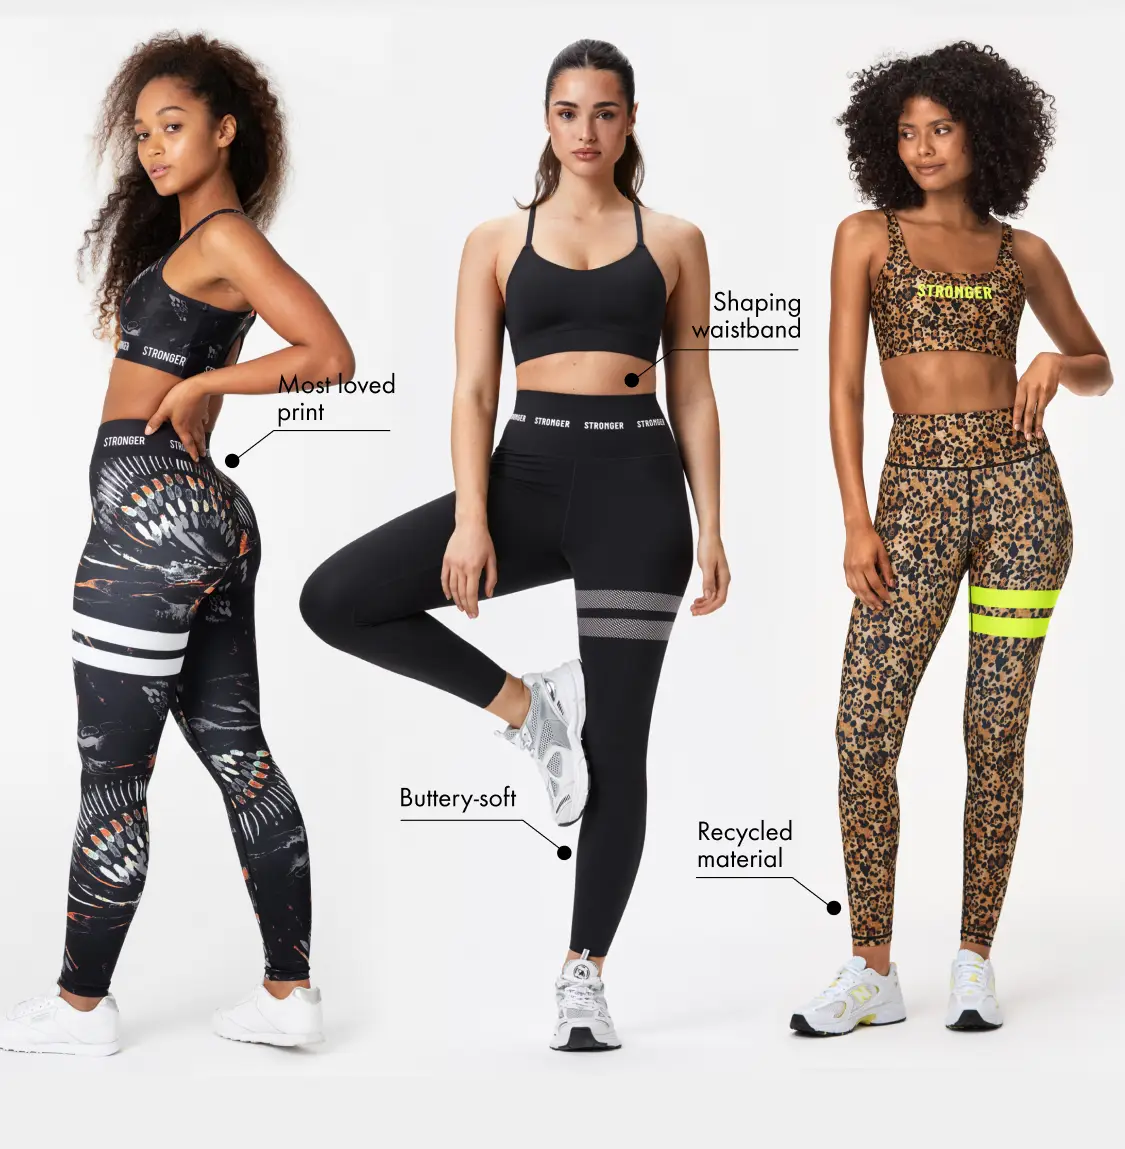 Which fabric is best for leggings? - Quora